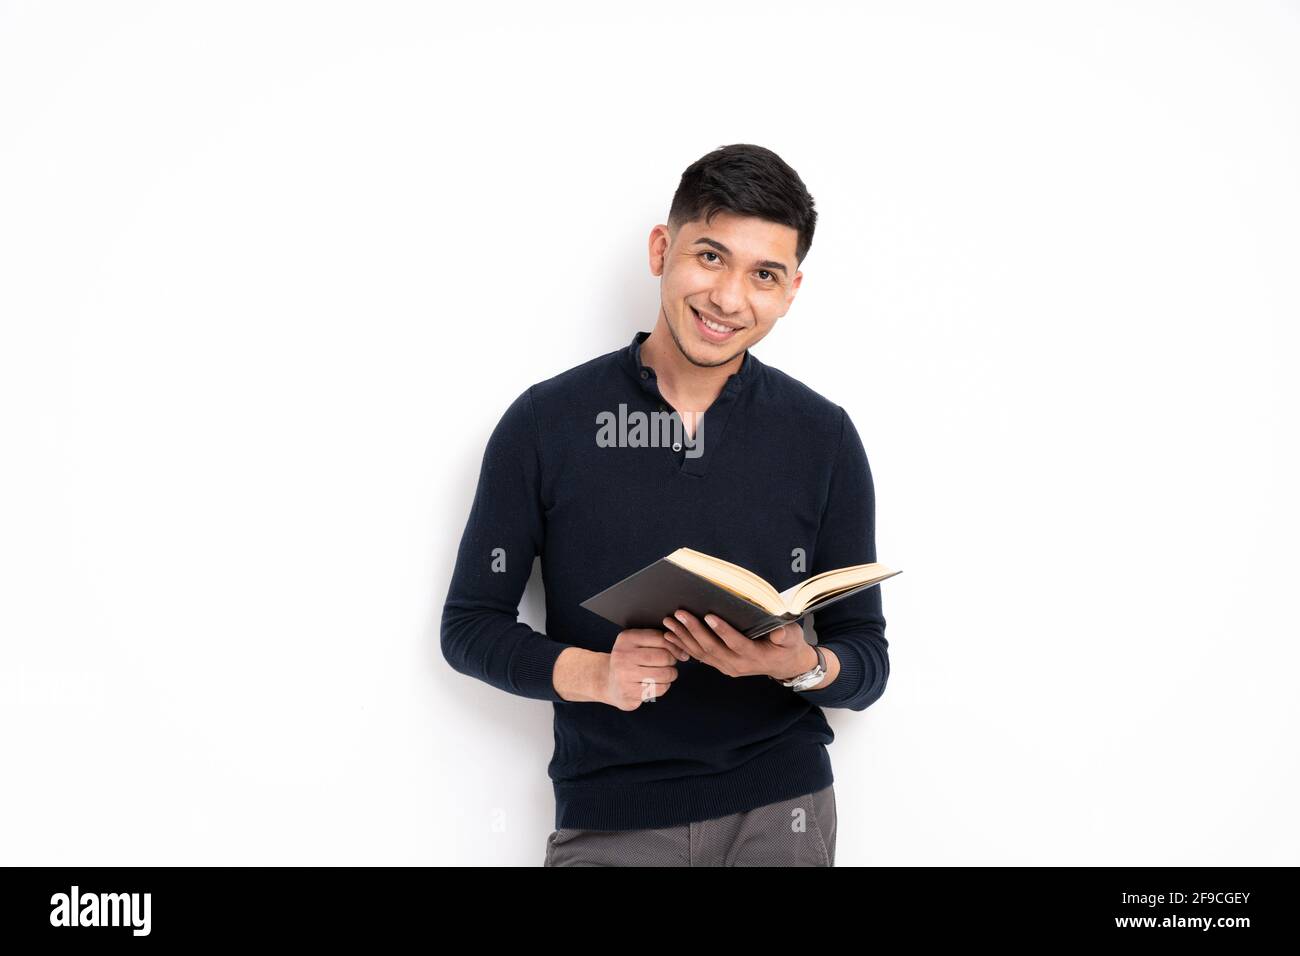 Caucasian man holding a book, smiling and looking at the camera isolated on a white background Stock Photo